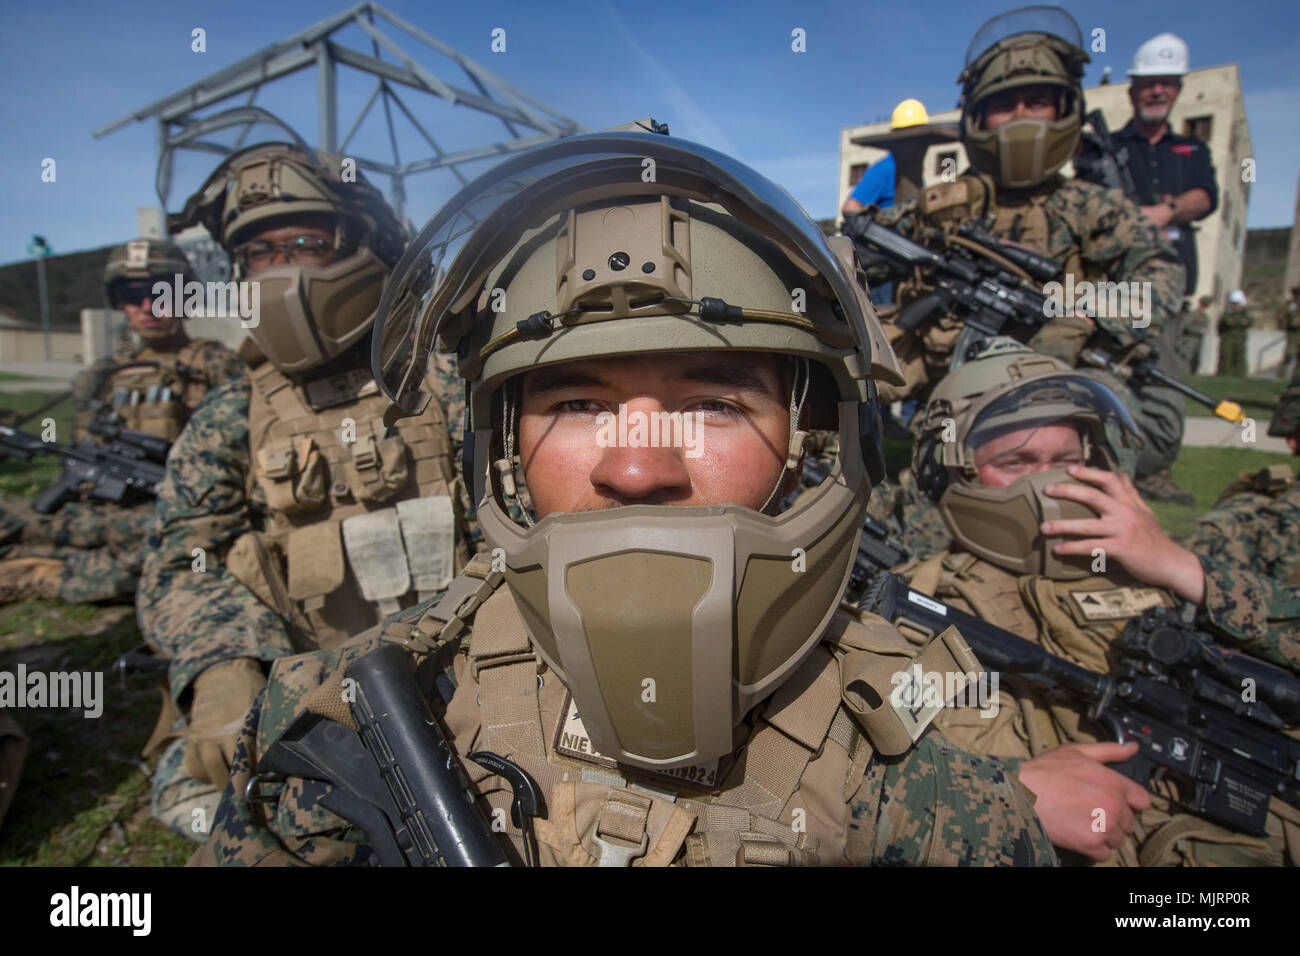 U.S. Marine Corps Lance Cpl. Jose Nieves, an infantryman with 3rd Battalion, 4th Marine Regiment, 1st Marine Division tests Step In Visor and Low Profile Mandible during Urban Advanced Naval Technology Exercise 2018 (ANTX-18) at Marine Corps Base Camp Pendleton, California, March 21, 2018. The Marines have been provided the opportunity to assess the operational utility of emerging technologies and engineering innovations that improve the Marine’s survivability, lethality and connectivity in complex urban environments. Armed Forces and civilians displaying courage bravery dedication commitment  Stock Photo